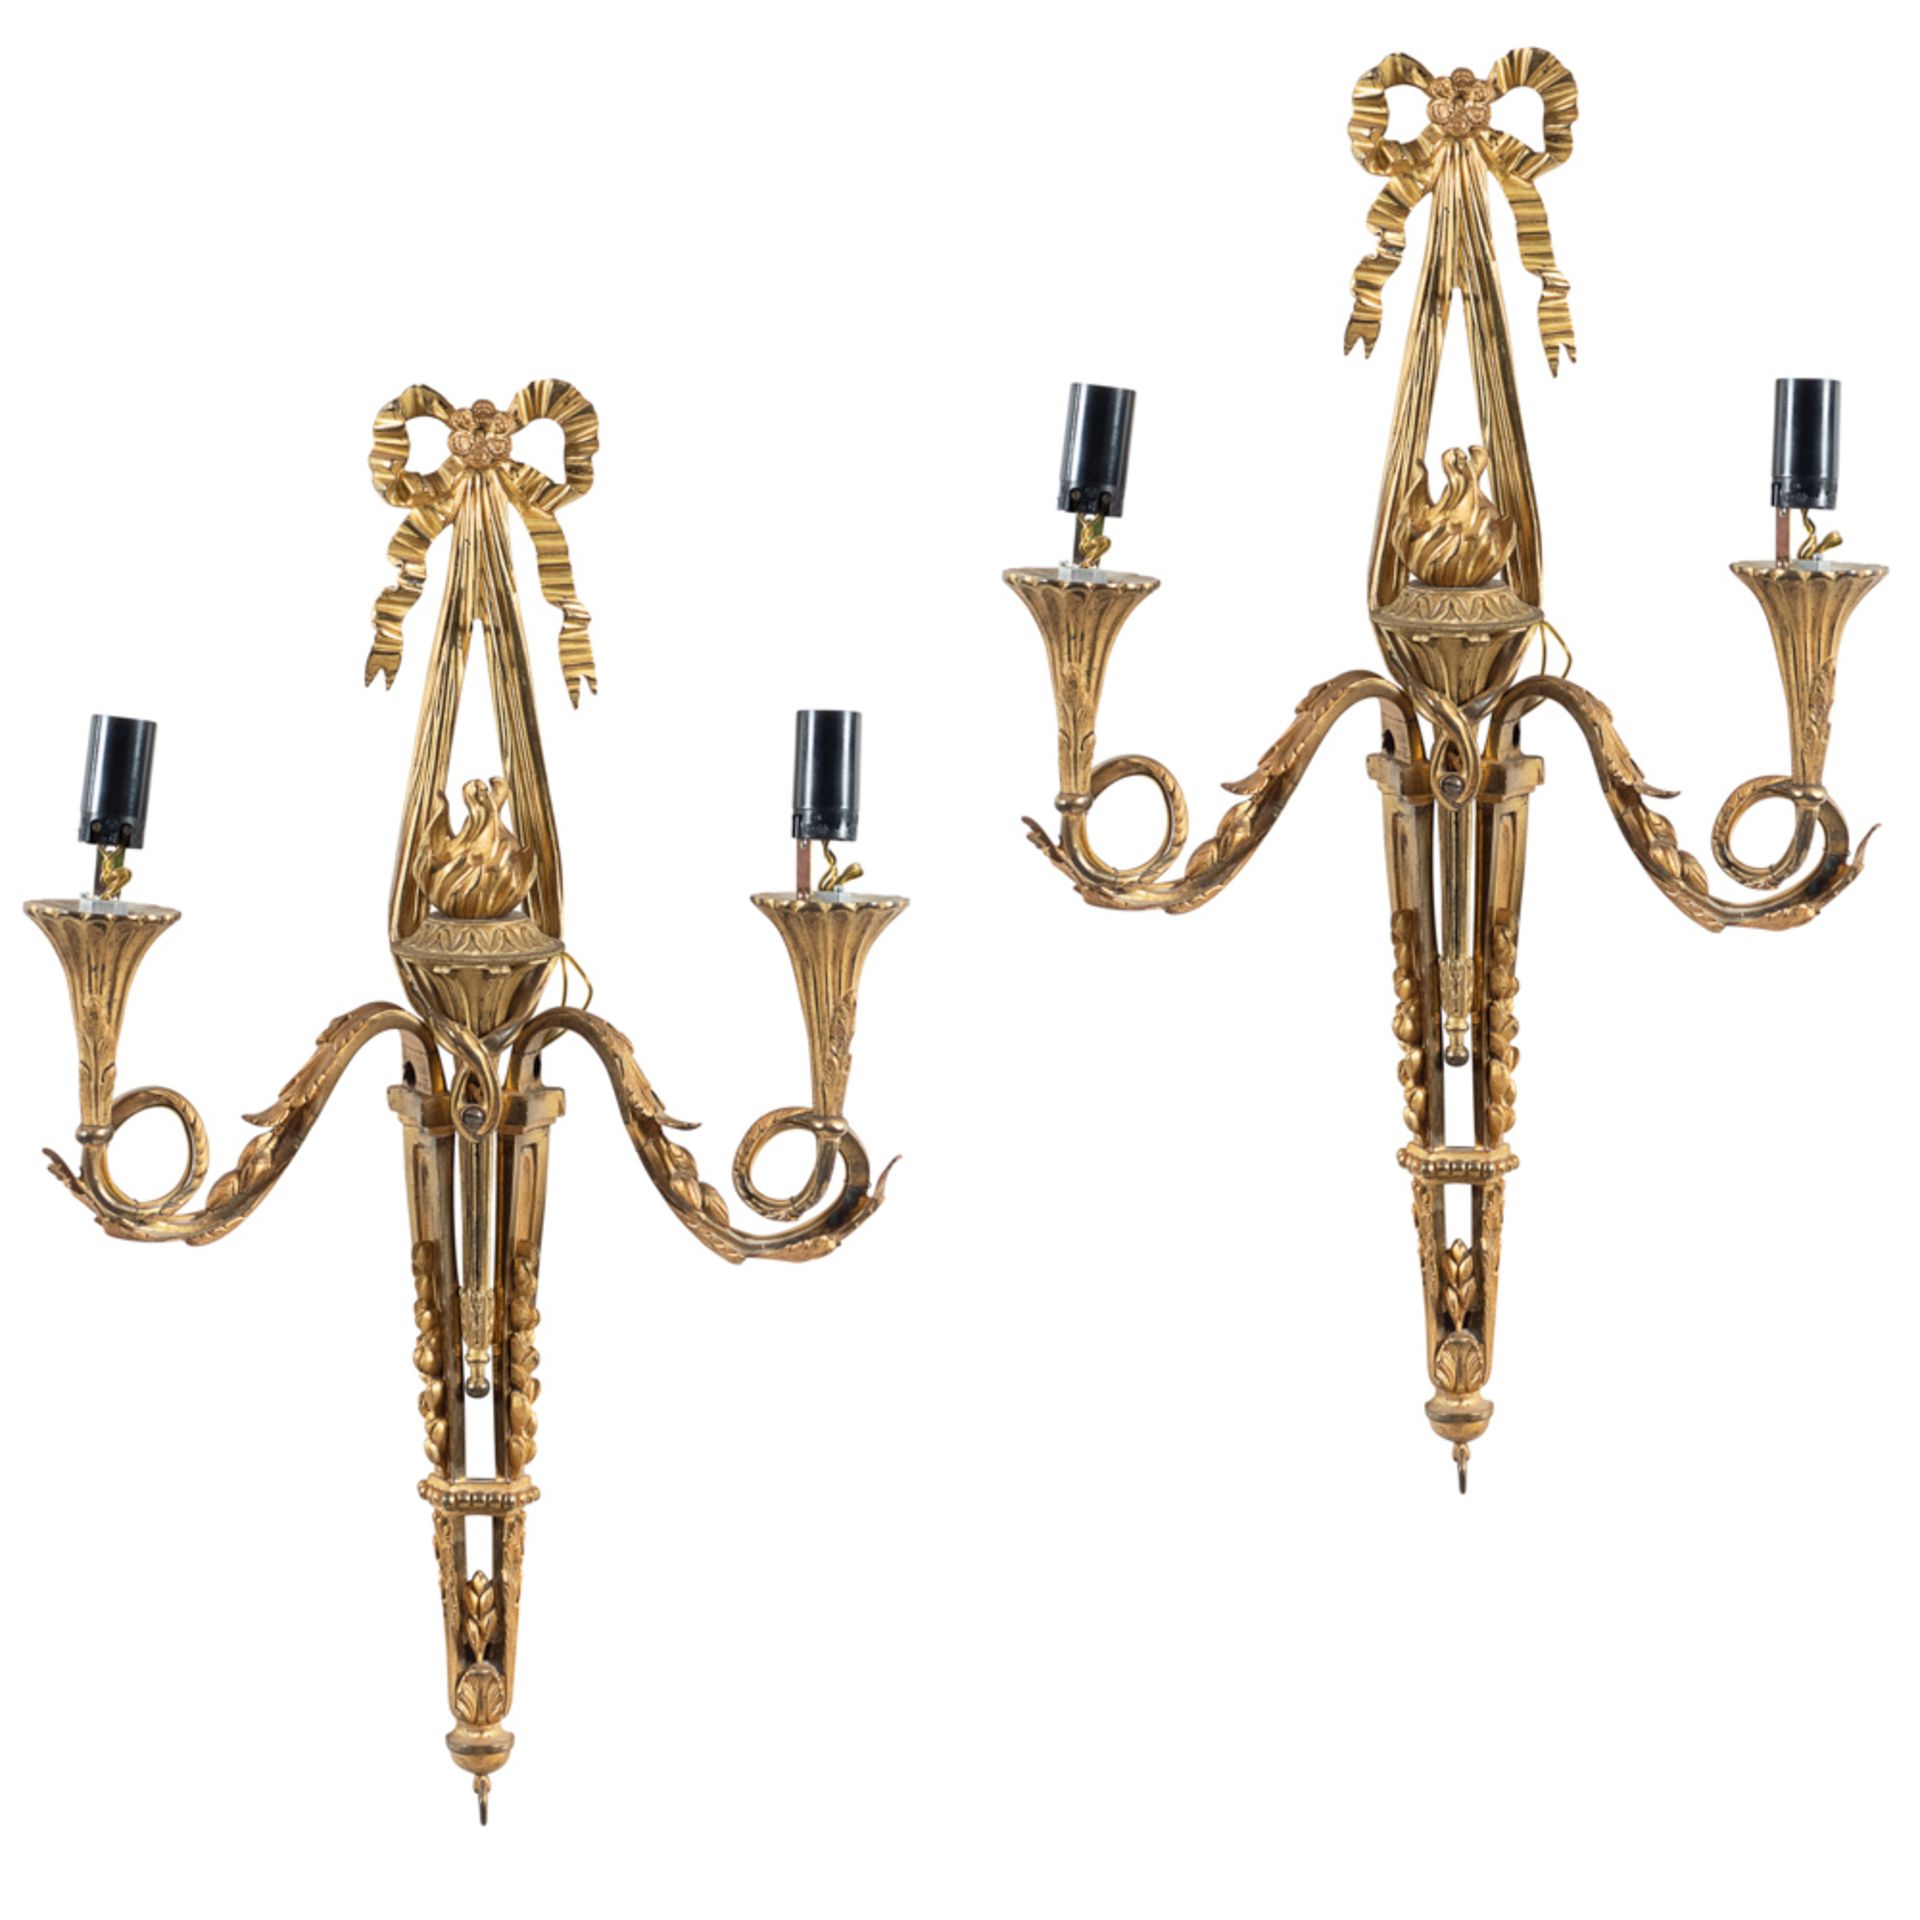 Pair of two-lights gilded bronze appliques France, 19th - 20th century 50x30 cm.